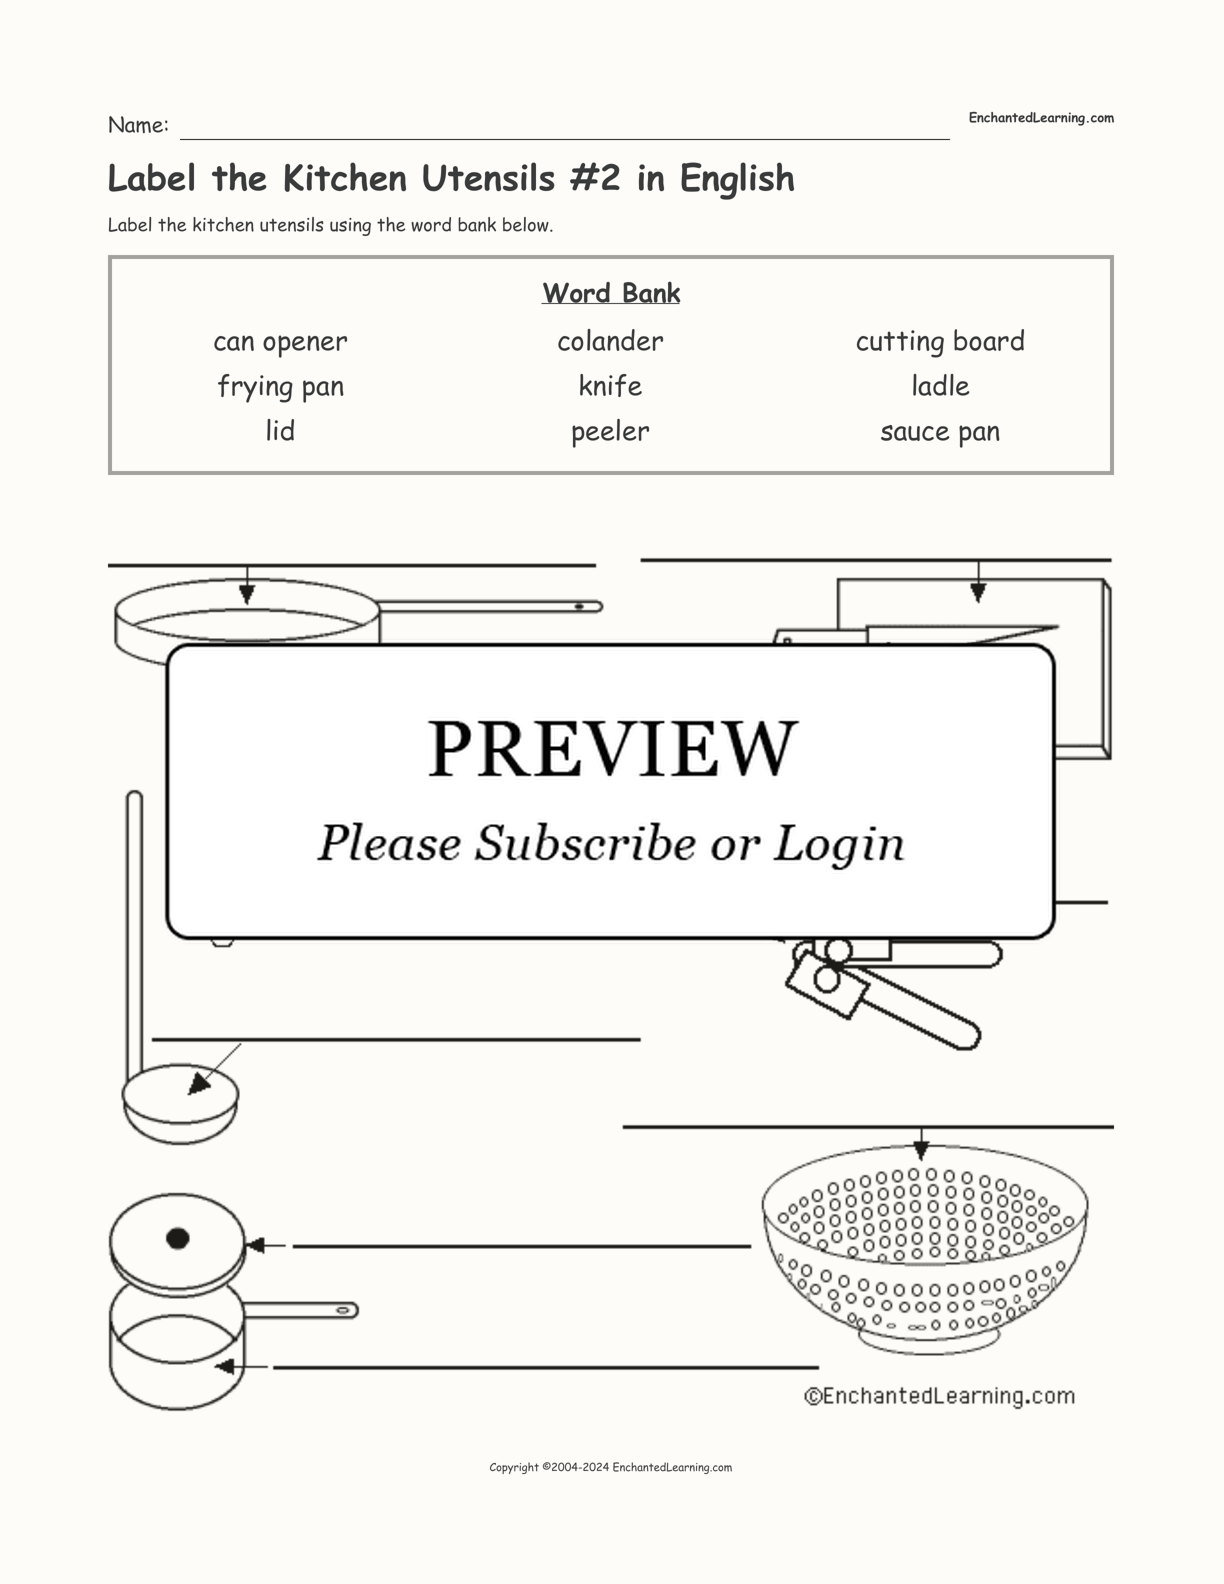 Label the Kitchen Utensils #2 in English interactive worksheet page 1